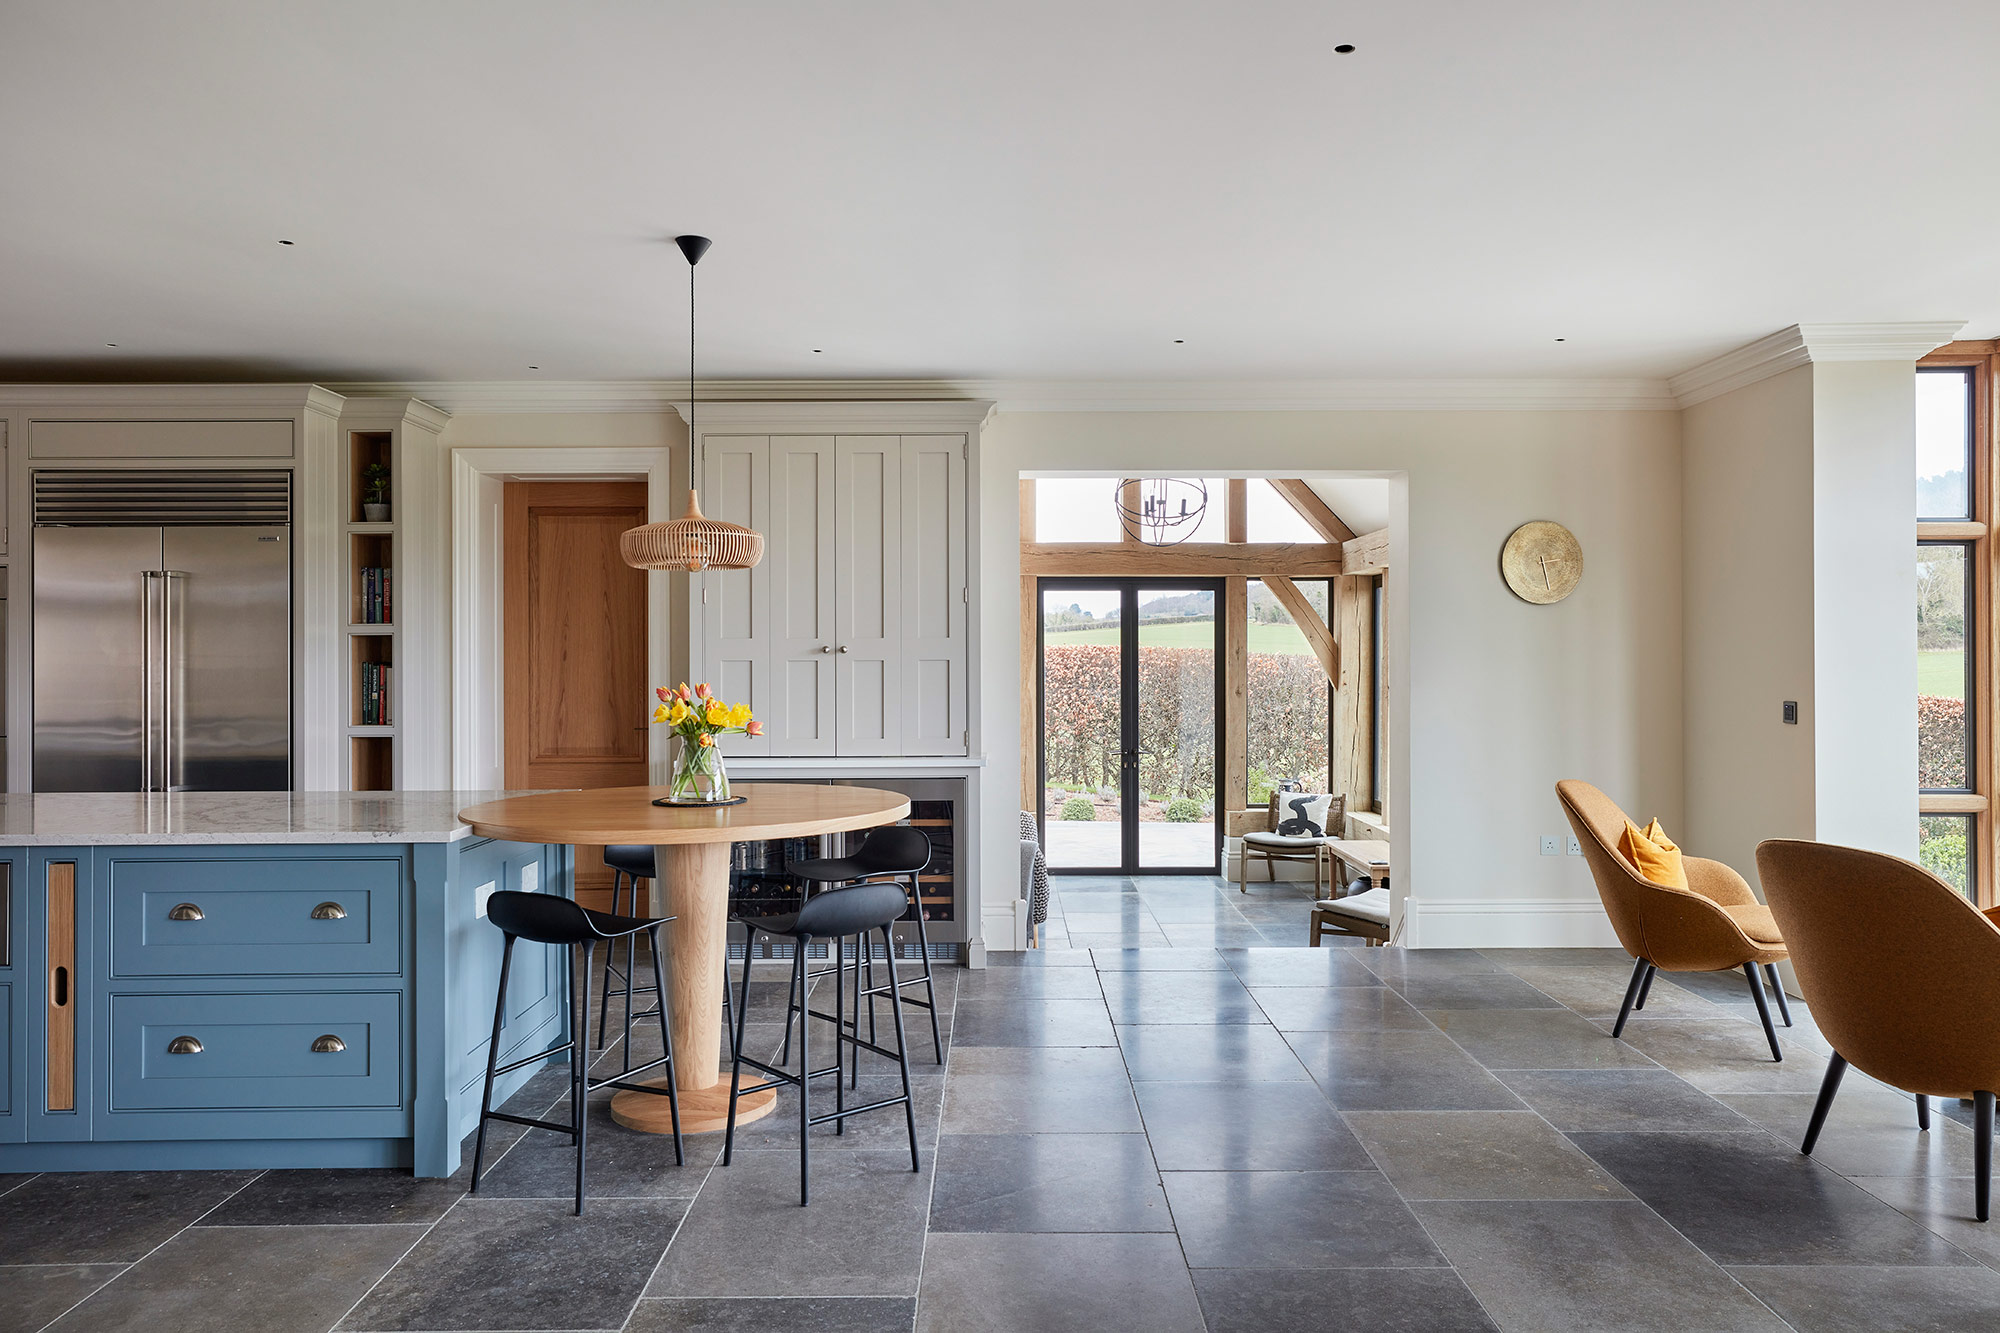 Interior view of kitchen - New build by KM Grant Surrey